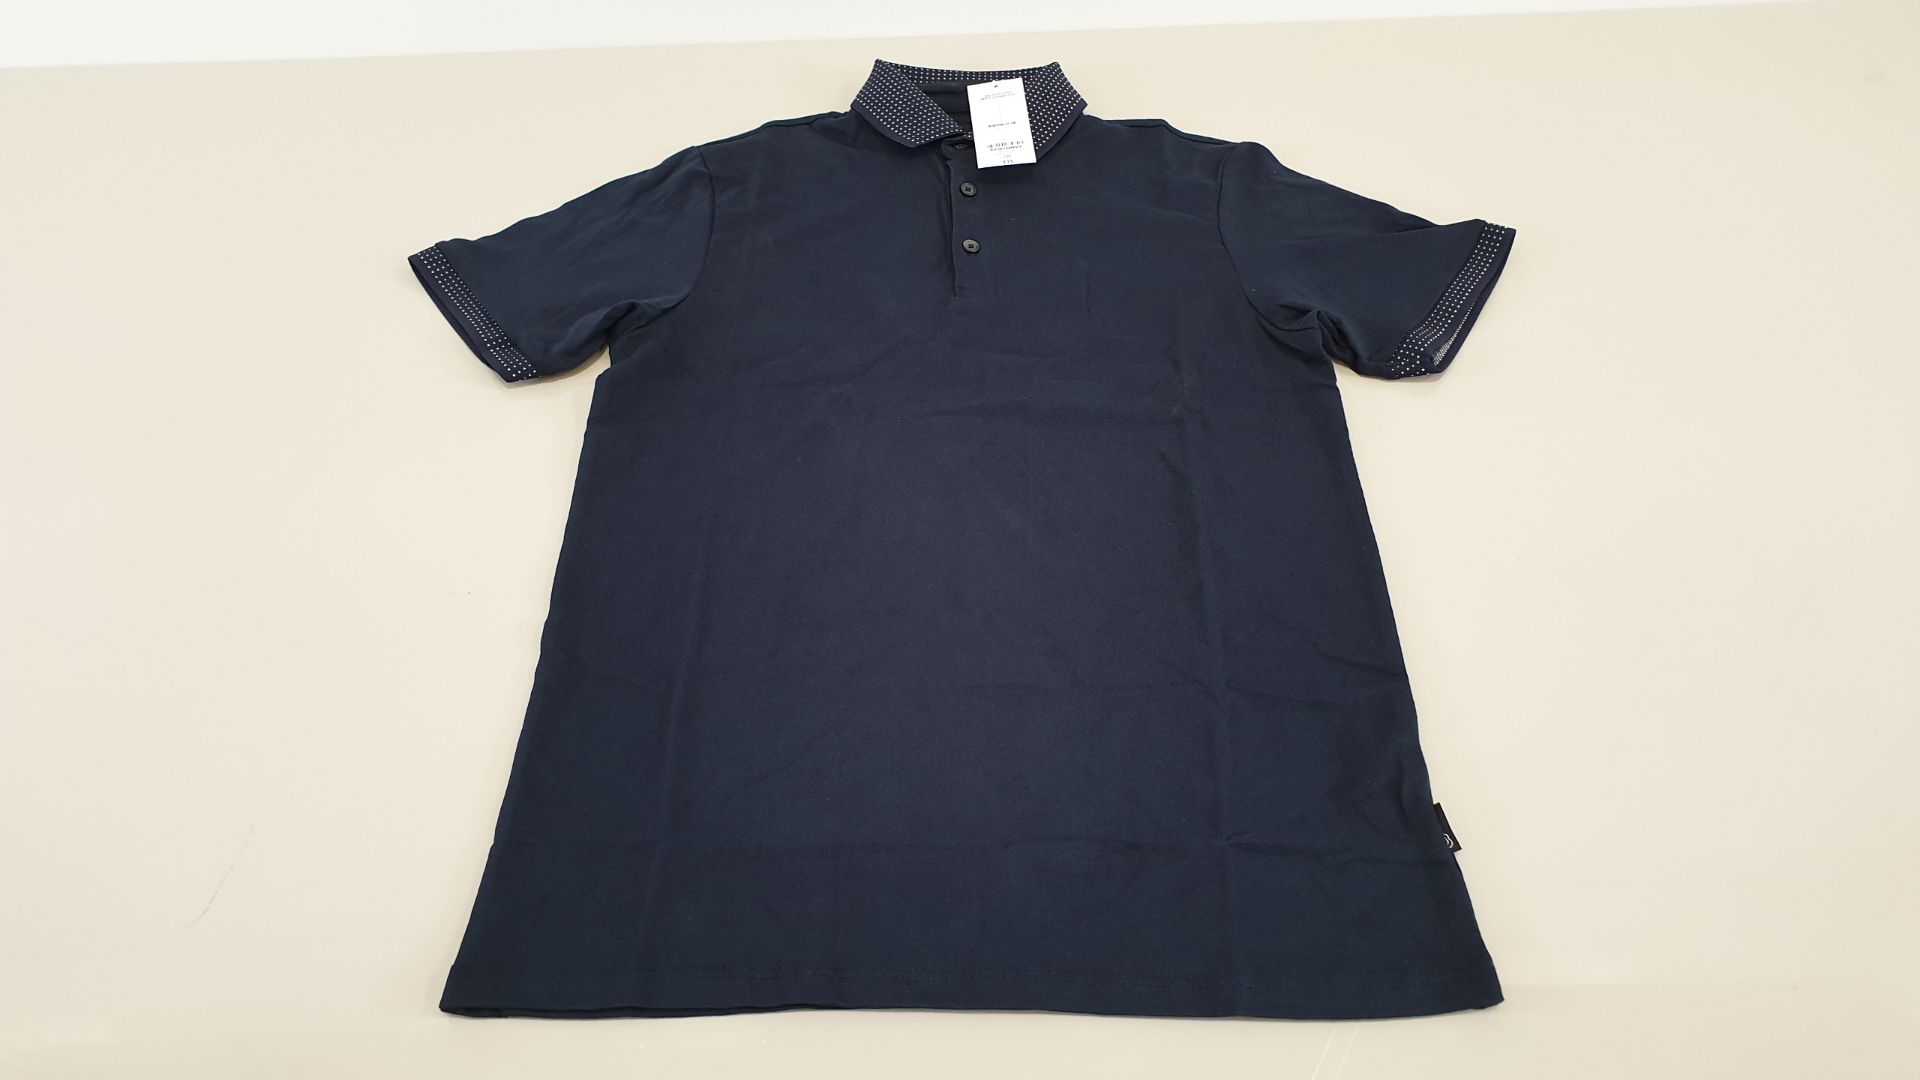 37 X BRAND NEW BURTON MENSWEAR NAVY POLO SHIRT WITH WHITE SPOTTED COLLAR SIZE LARGE